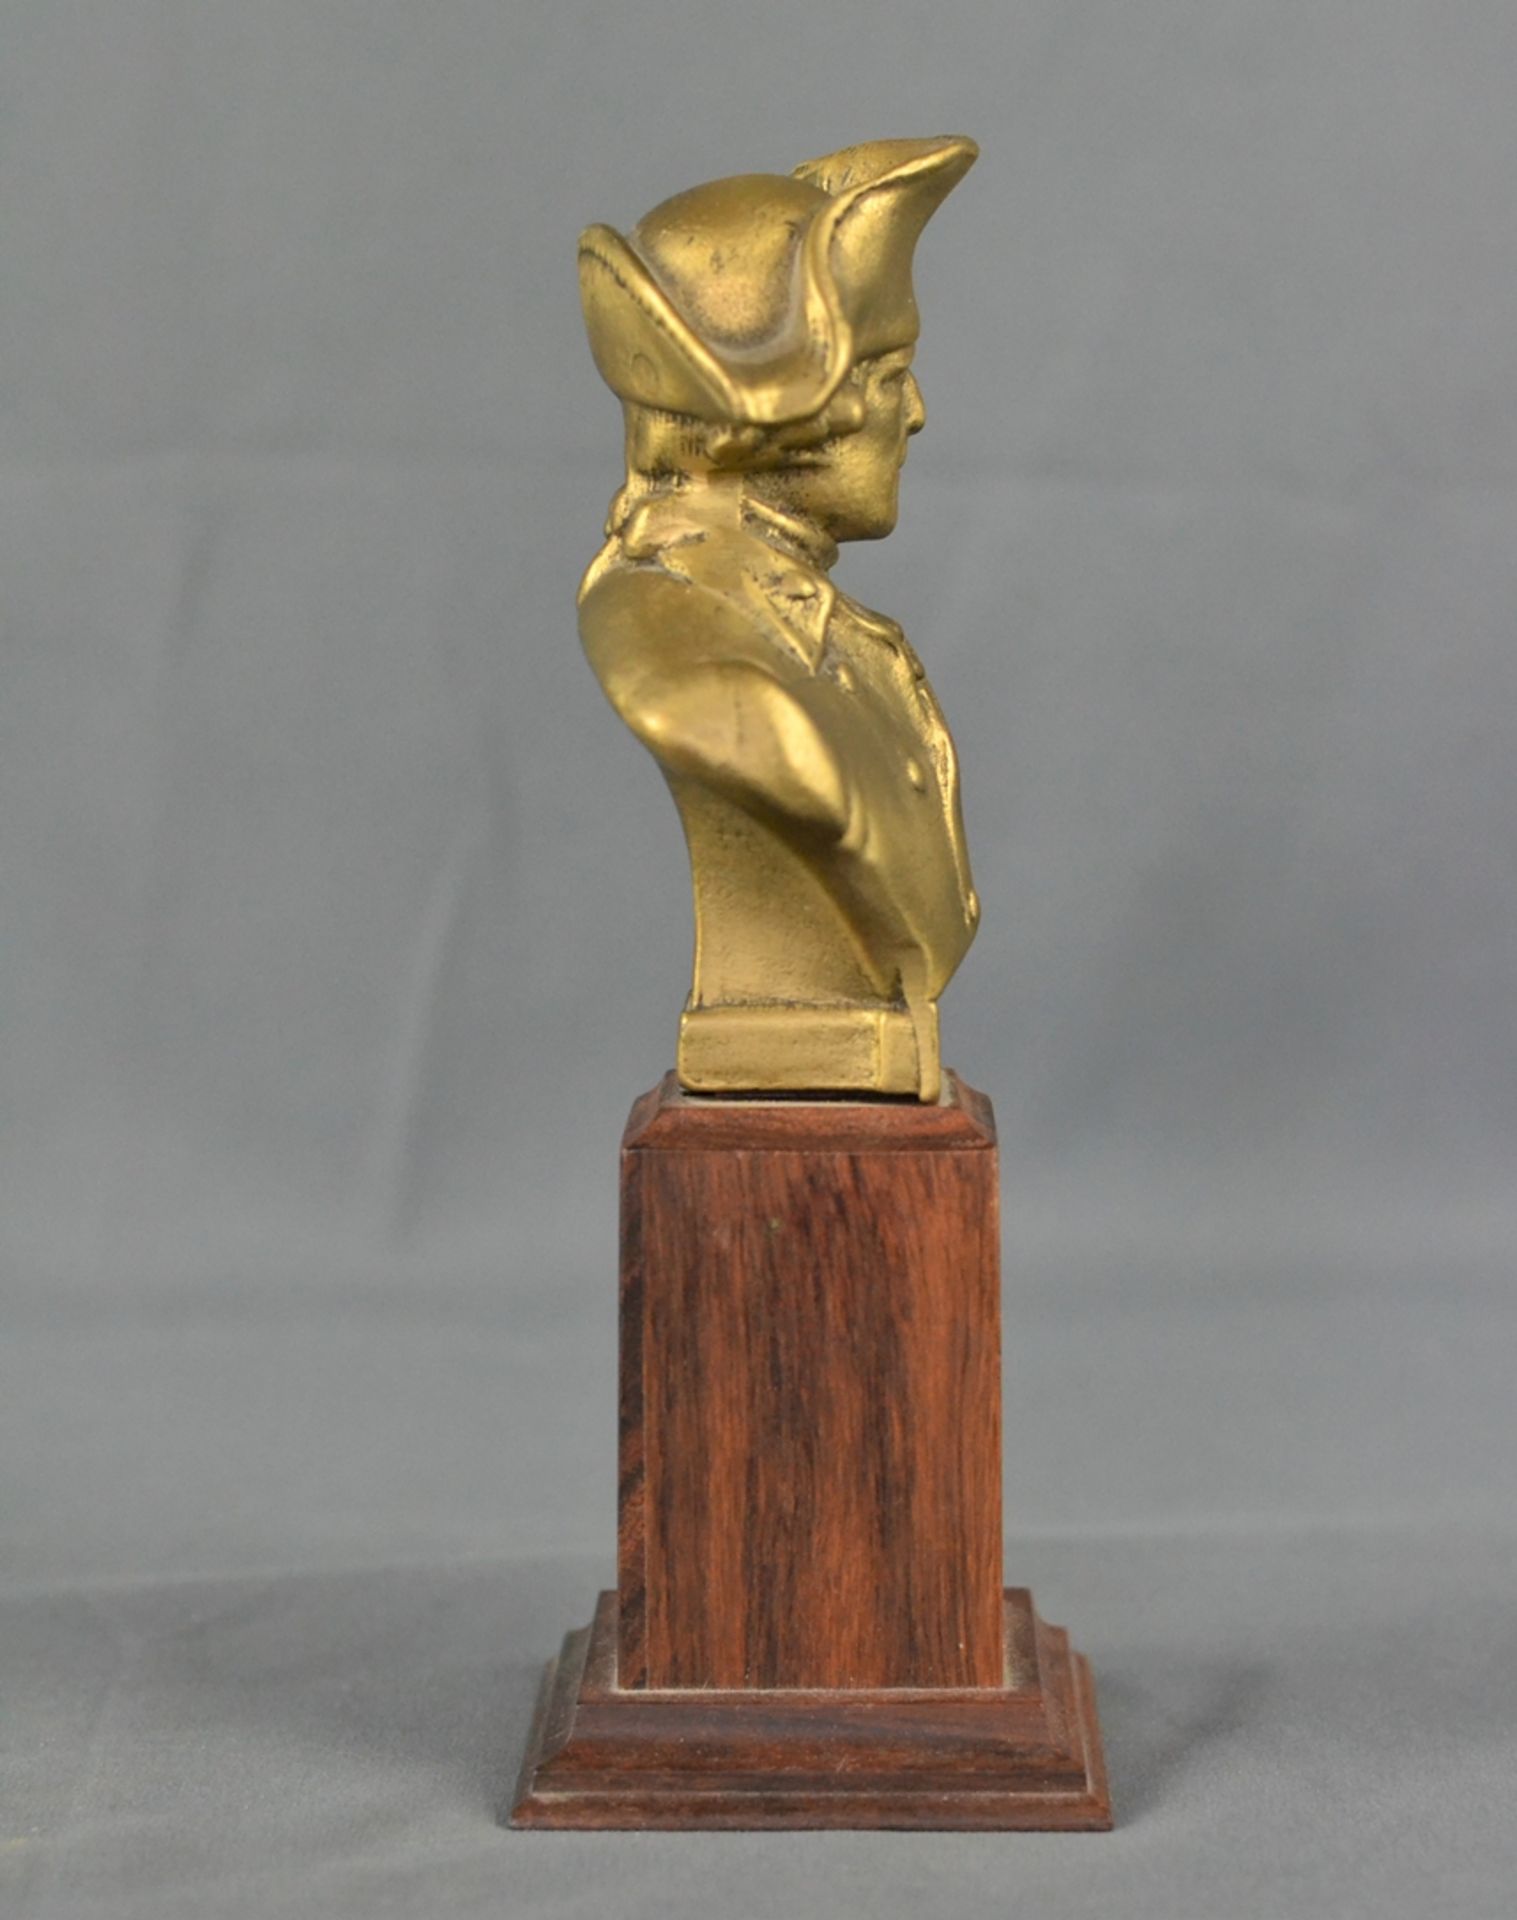 Bust "Frederick II", metal casting gilded, on high wooden base, height 22,5cm - Image 5 of 5